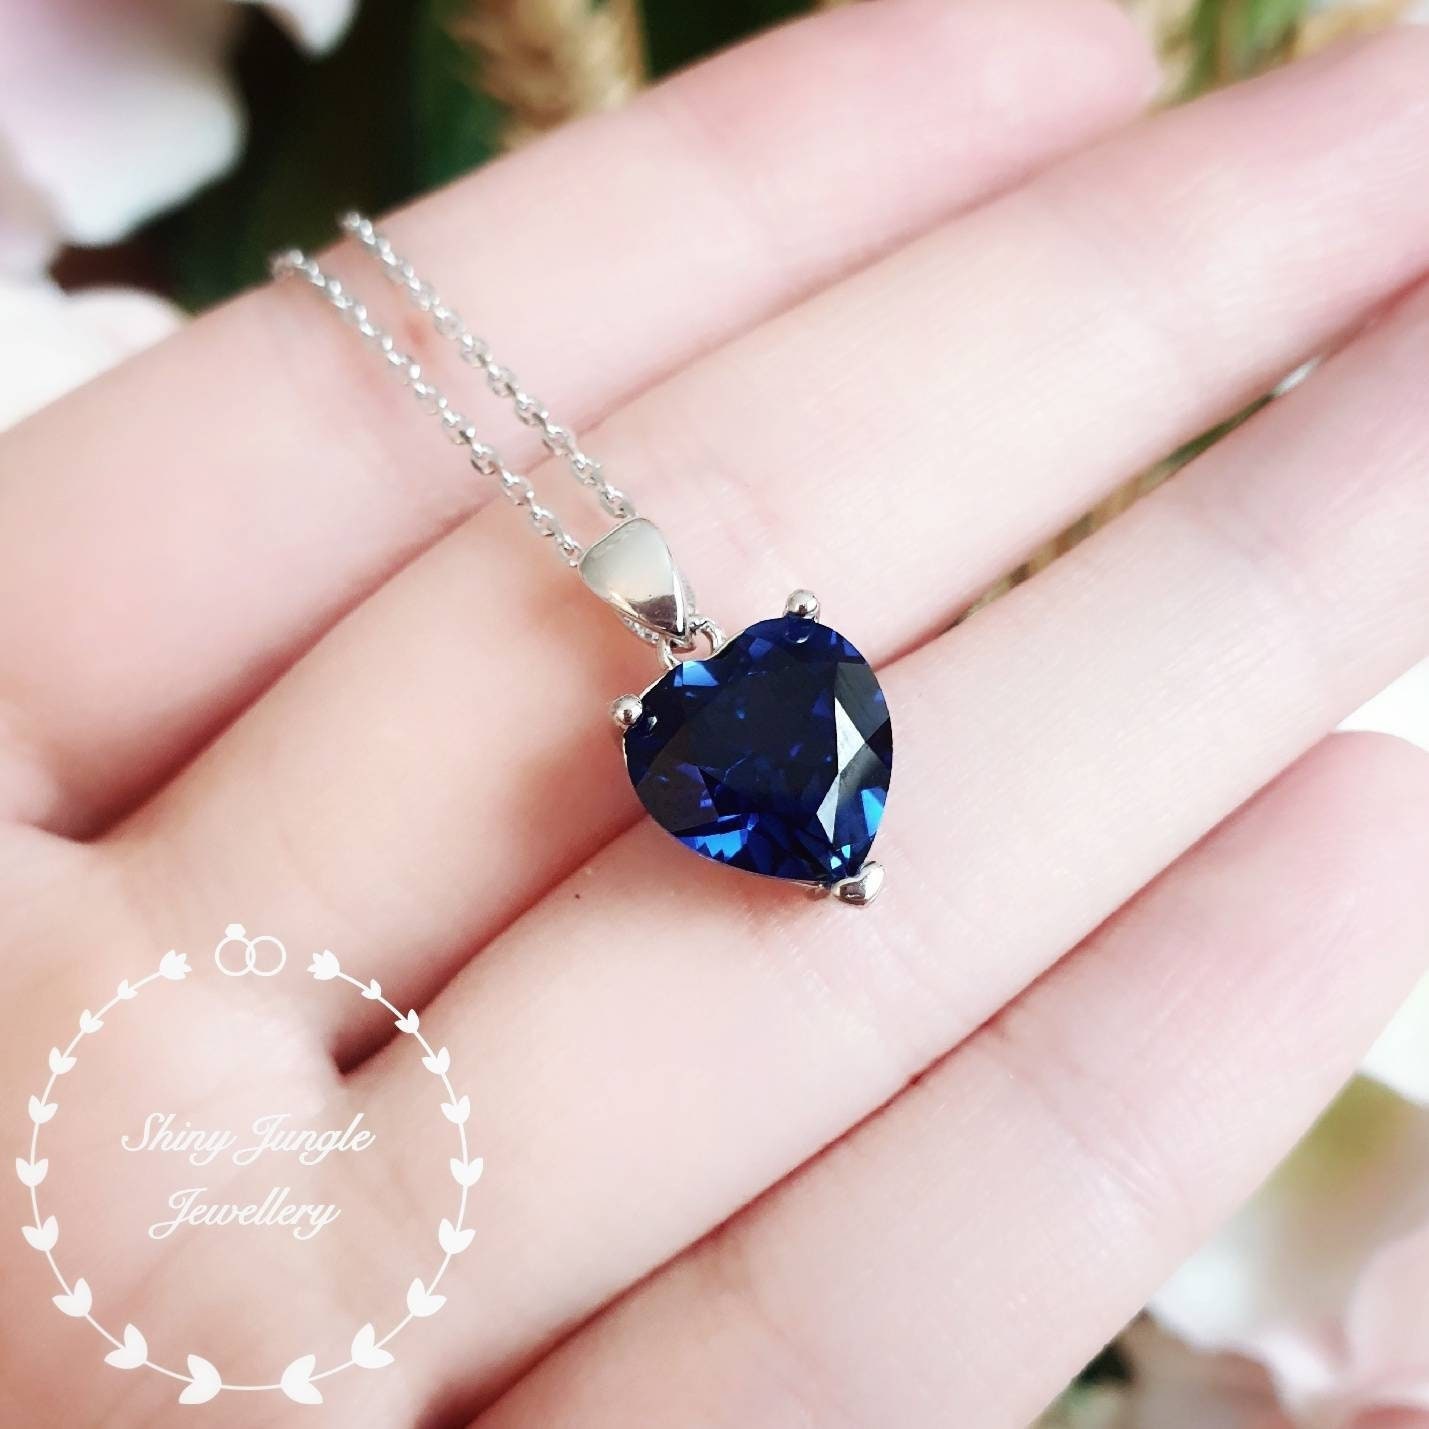 Genuine Lab Grown Heart Shaped Sapphire Necklace, Royal Blue